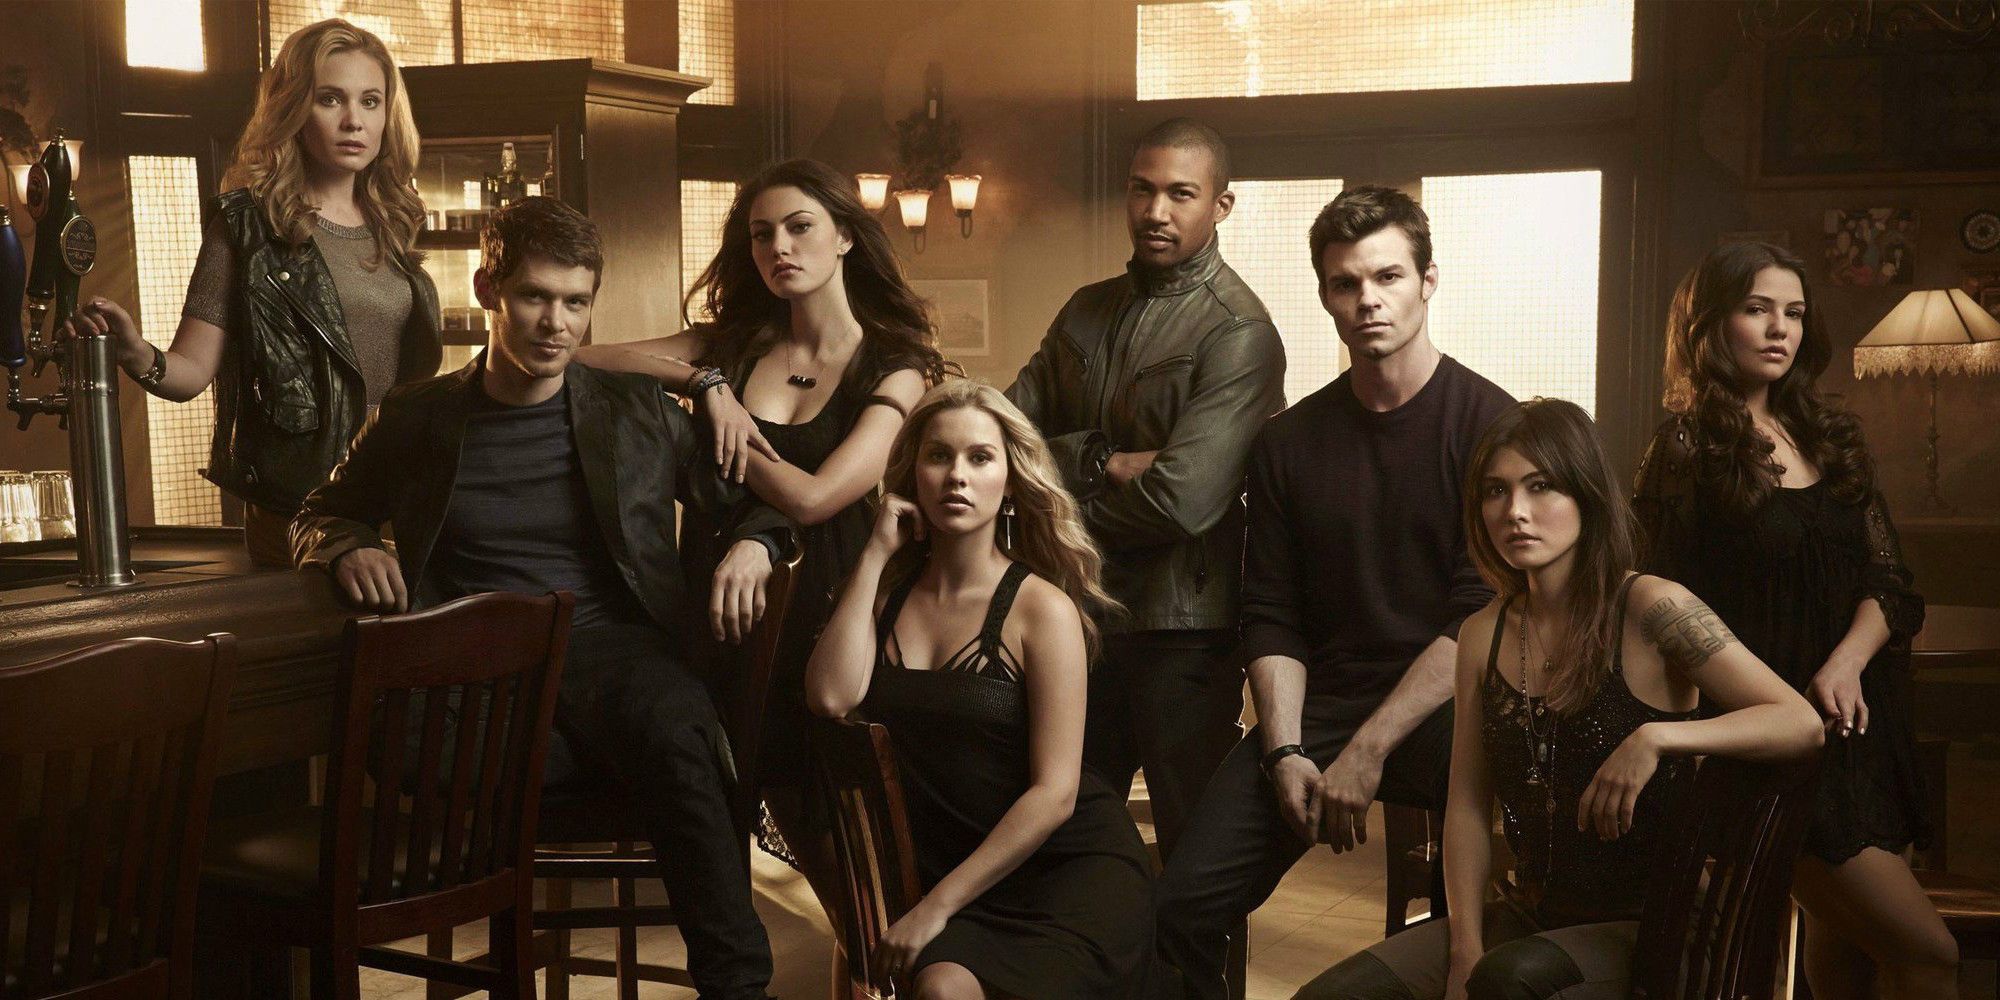 The Originals Season 3 Promo images featuring the cast members sitting together 